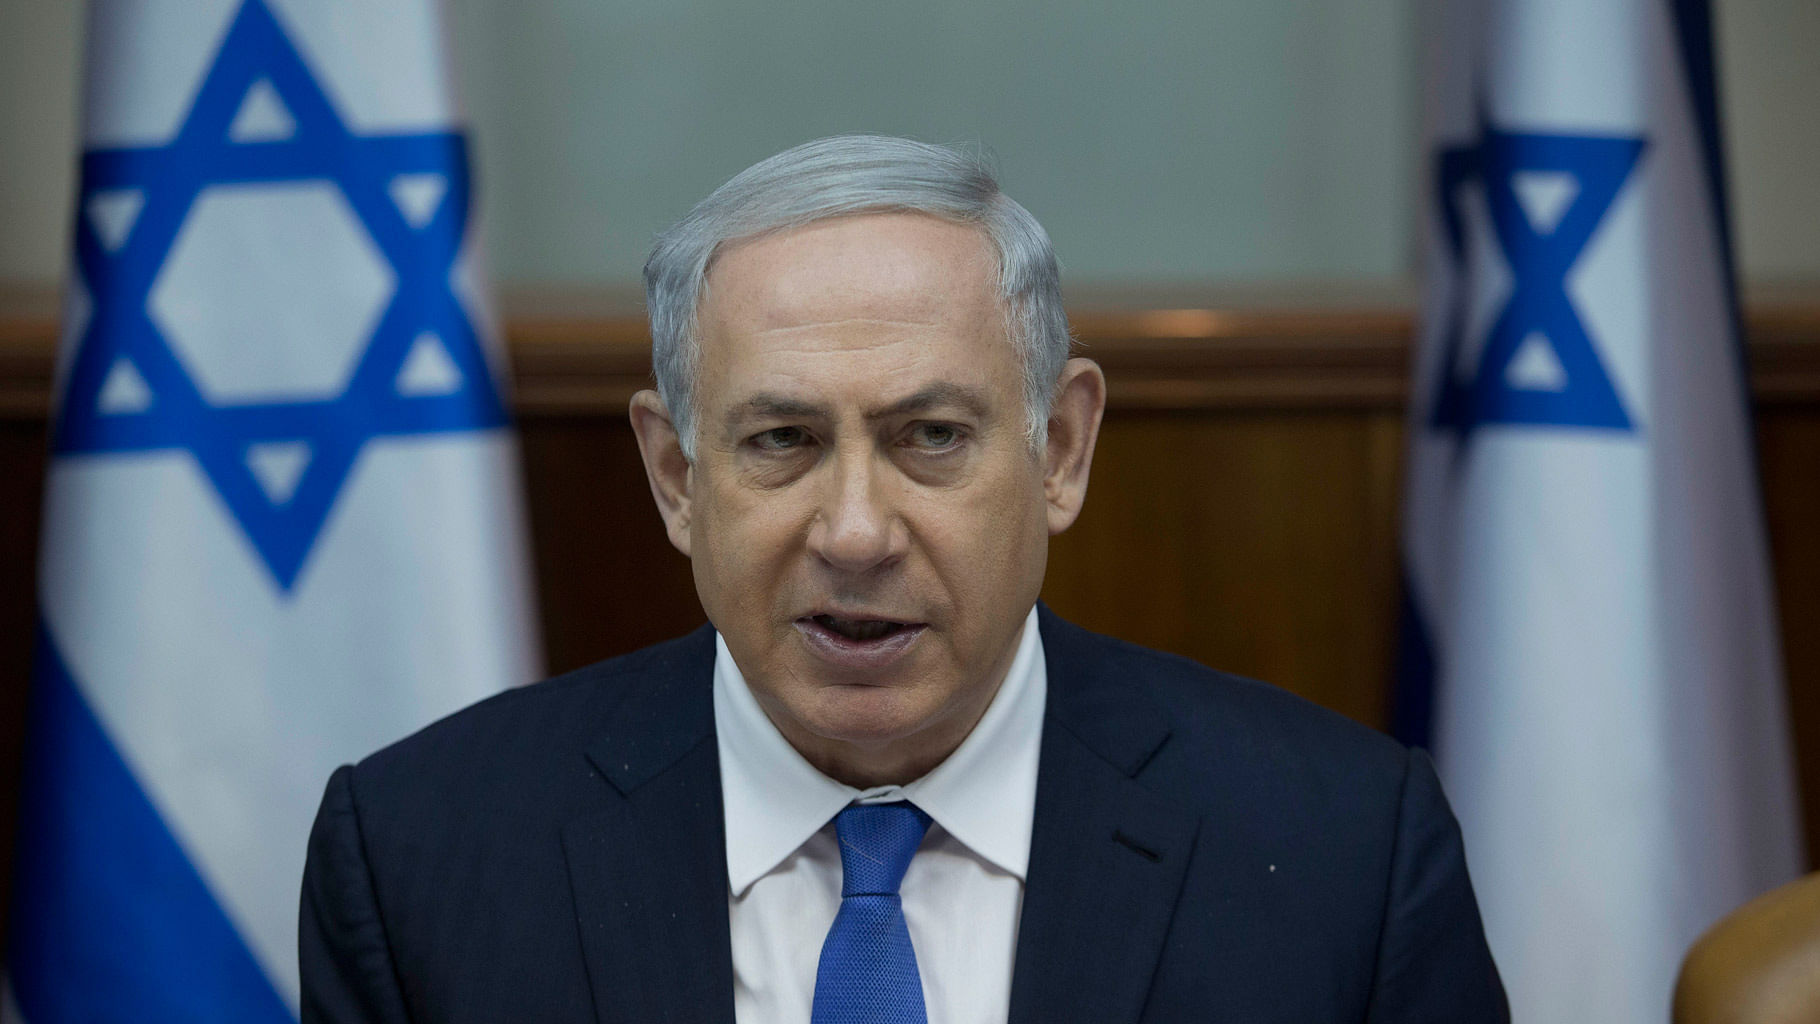 After a decade in office, Benjamin Netanyahu’s long tenure as Israel’s prime minister may soon be ending.